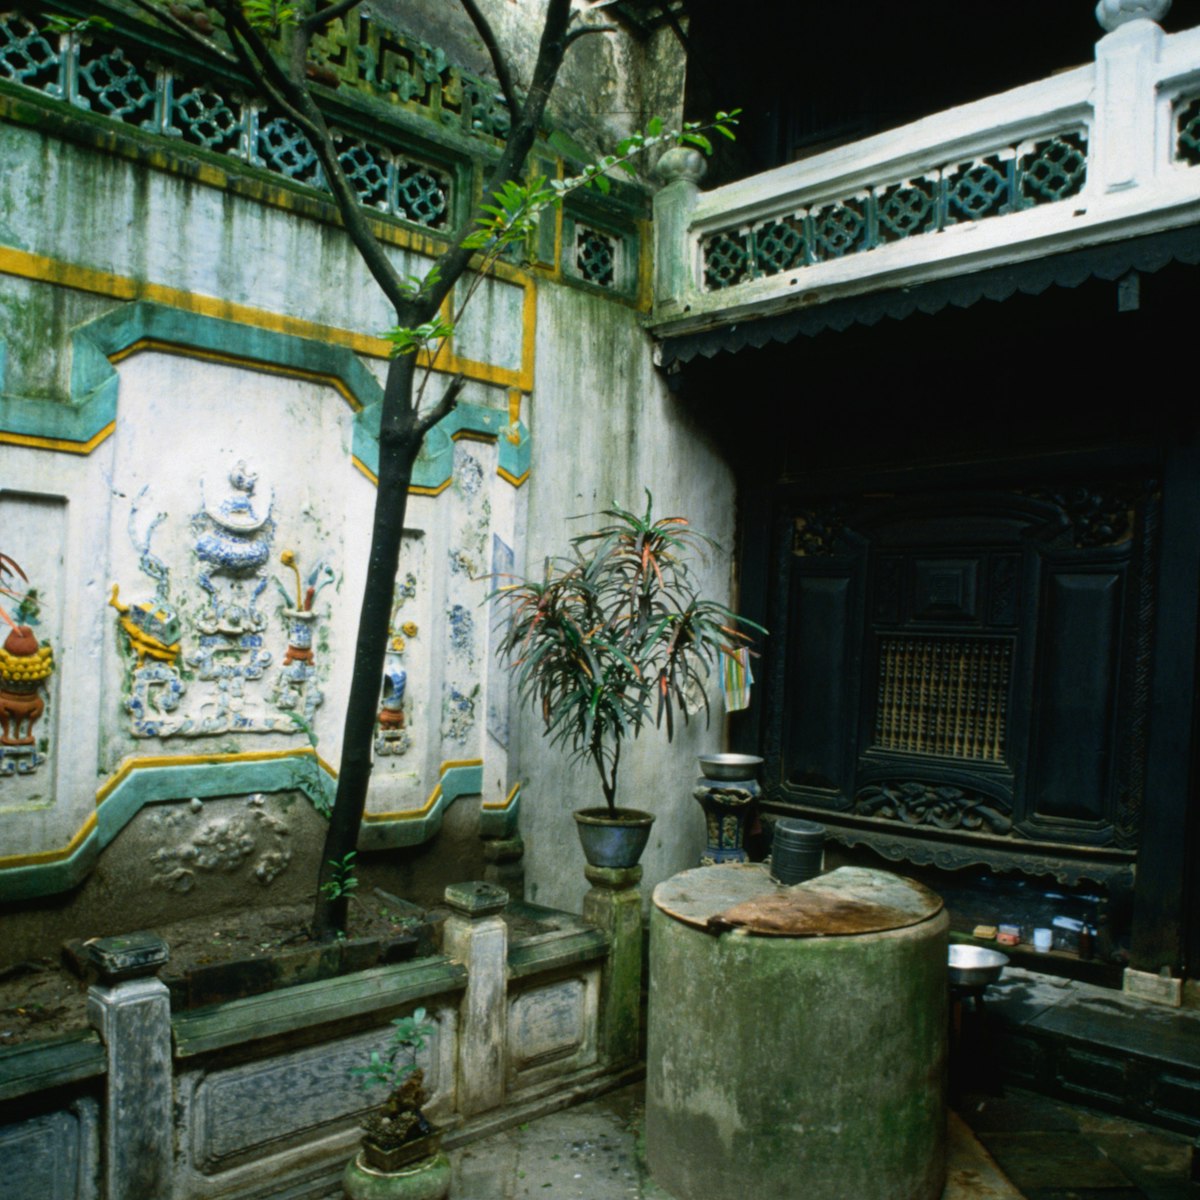 The well preserved, 17th century Tan Ky House in Hoi An looks much the same as it did in the early 19th century